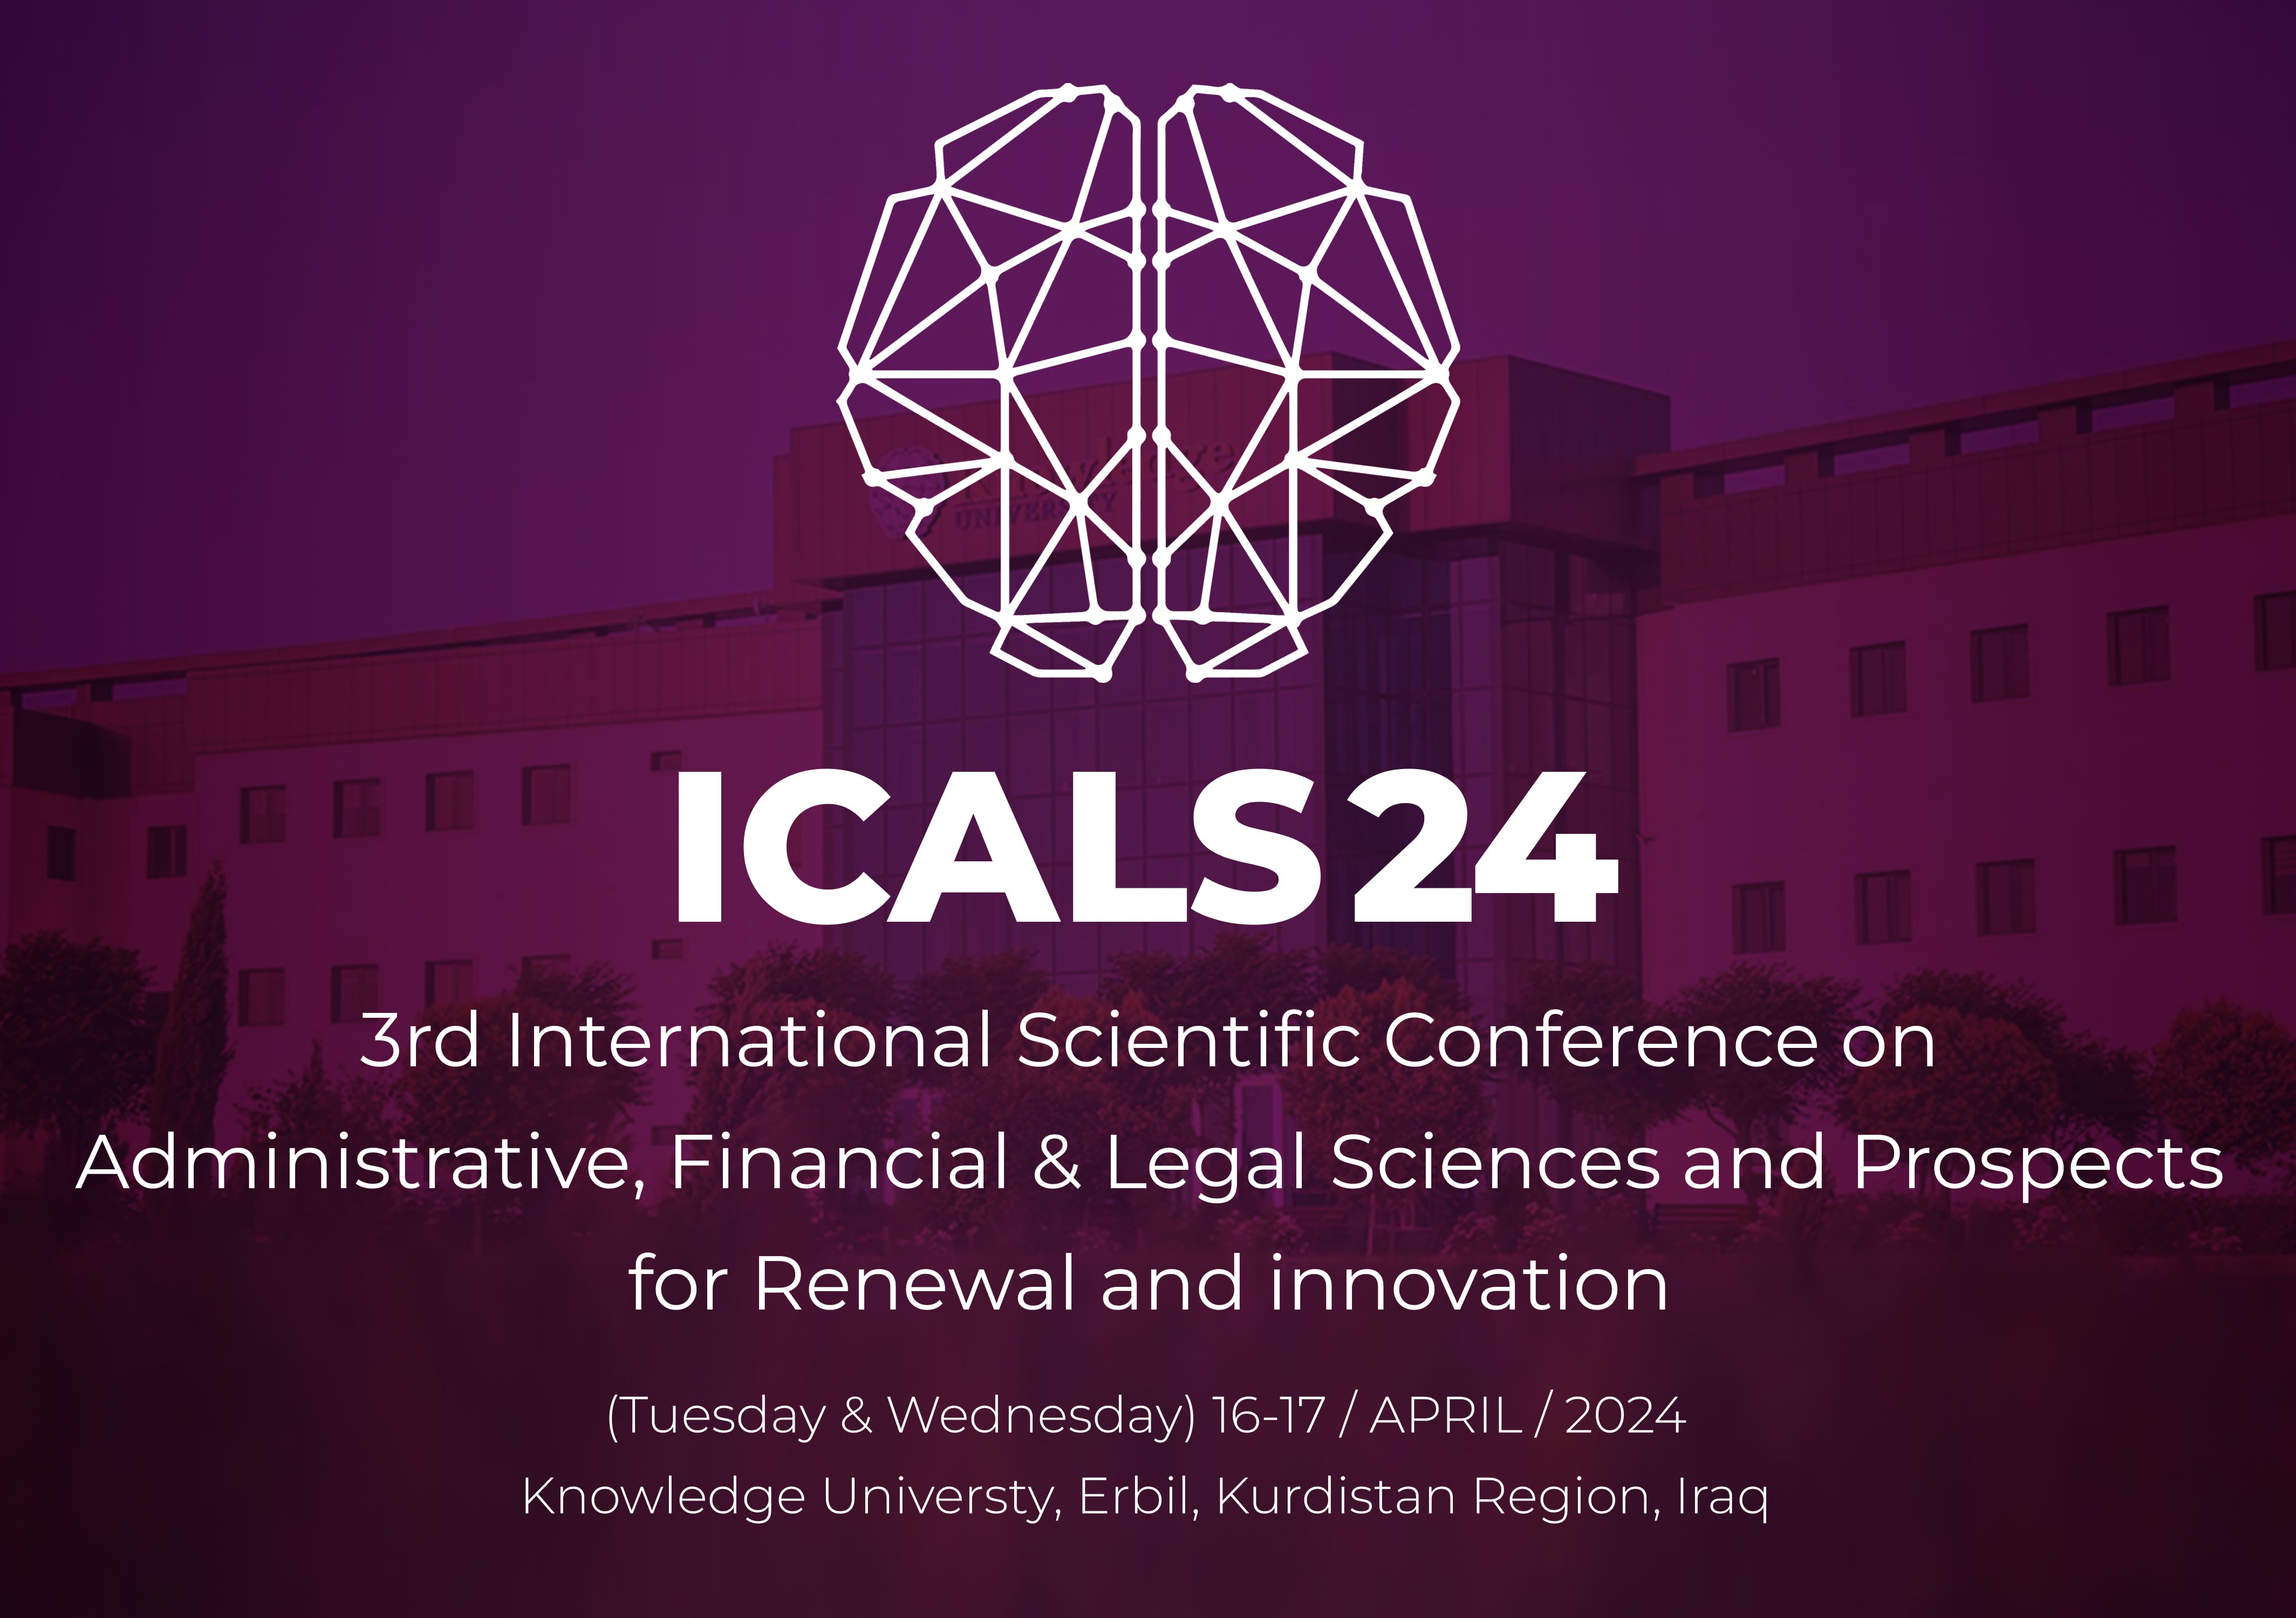 ICALS24: The 3rd International Scientific Conference on Administrative, Financial & Legal Sciences and Prospects for Renewal and innovation